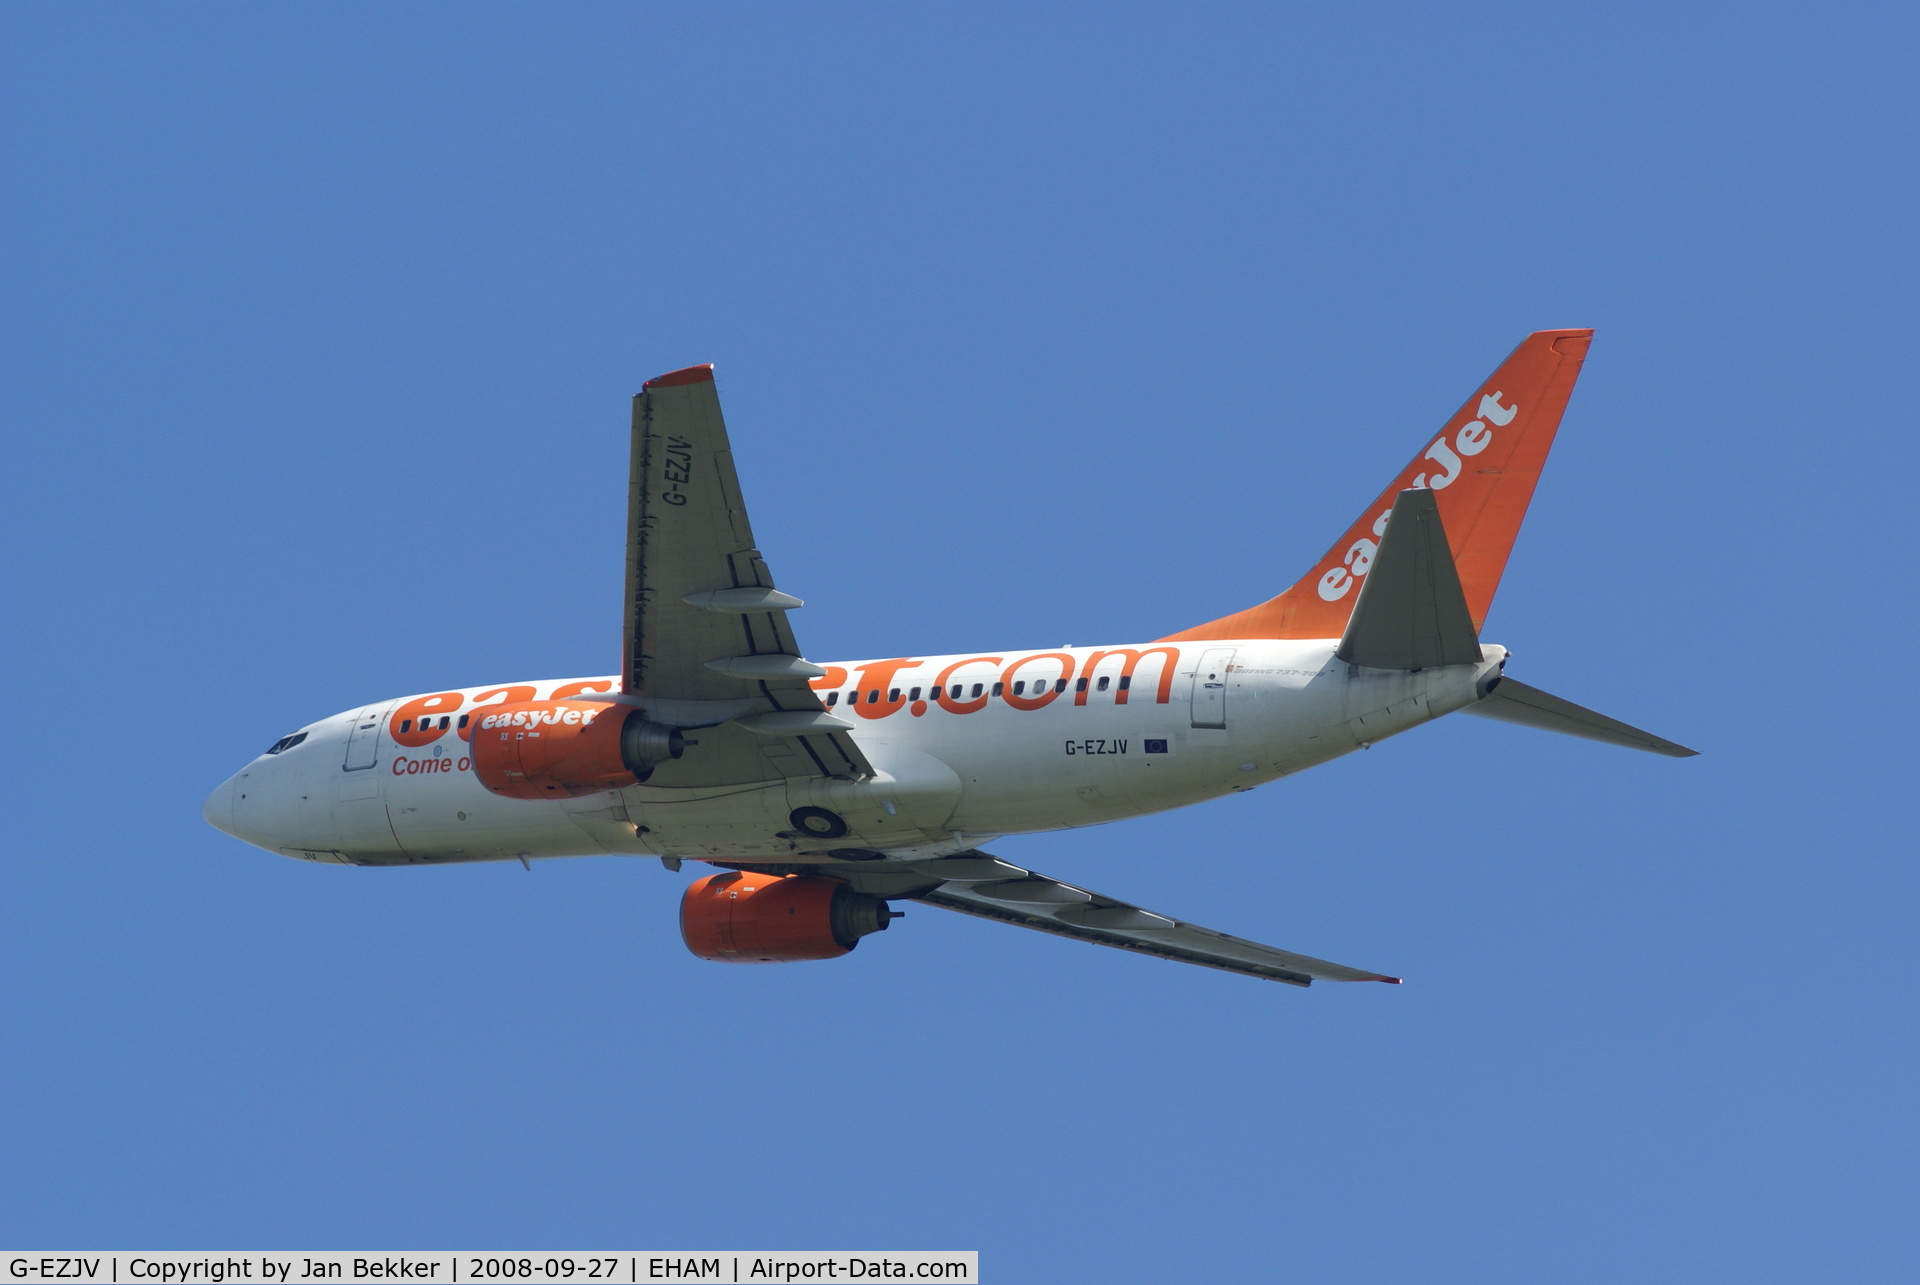 G-EZJV, 2003 Boeing 737-73V C/N 32417, Just after take off from the Polderbaan